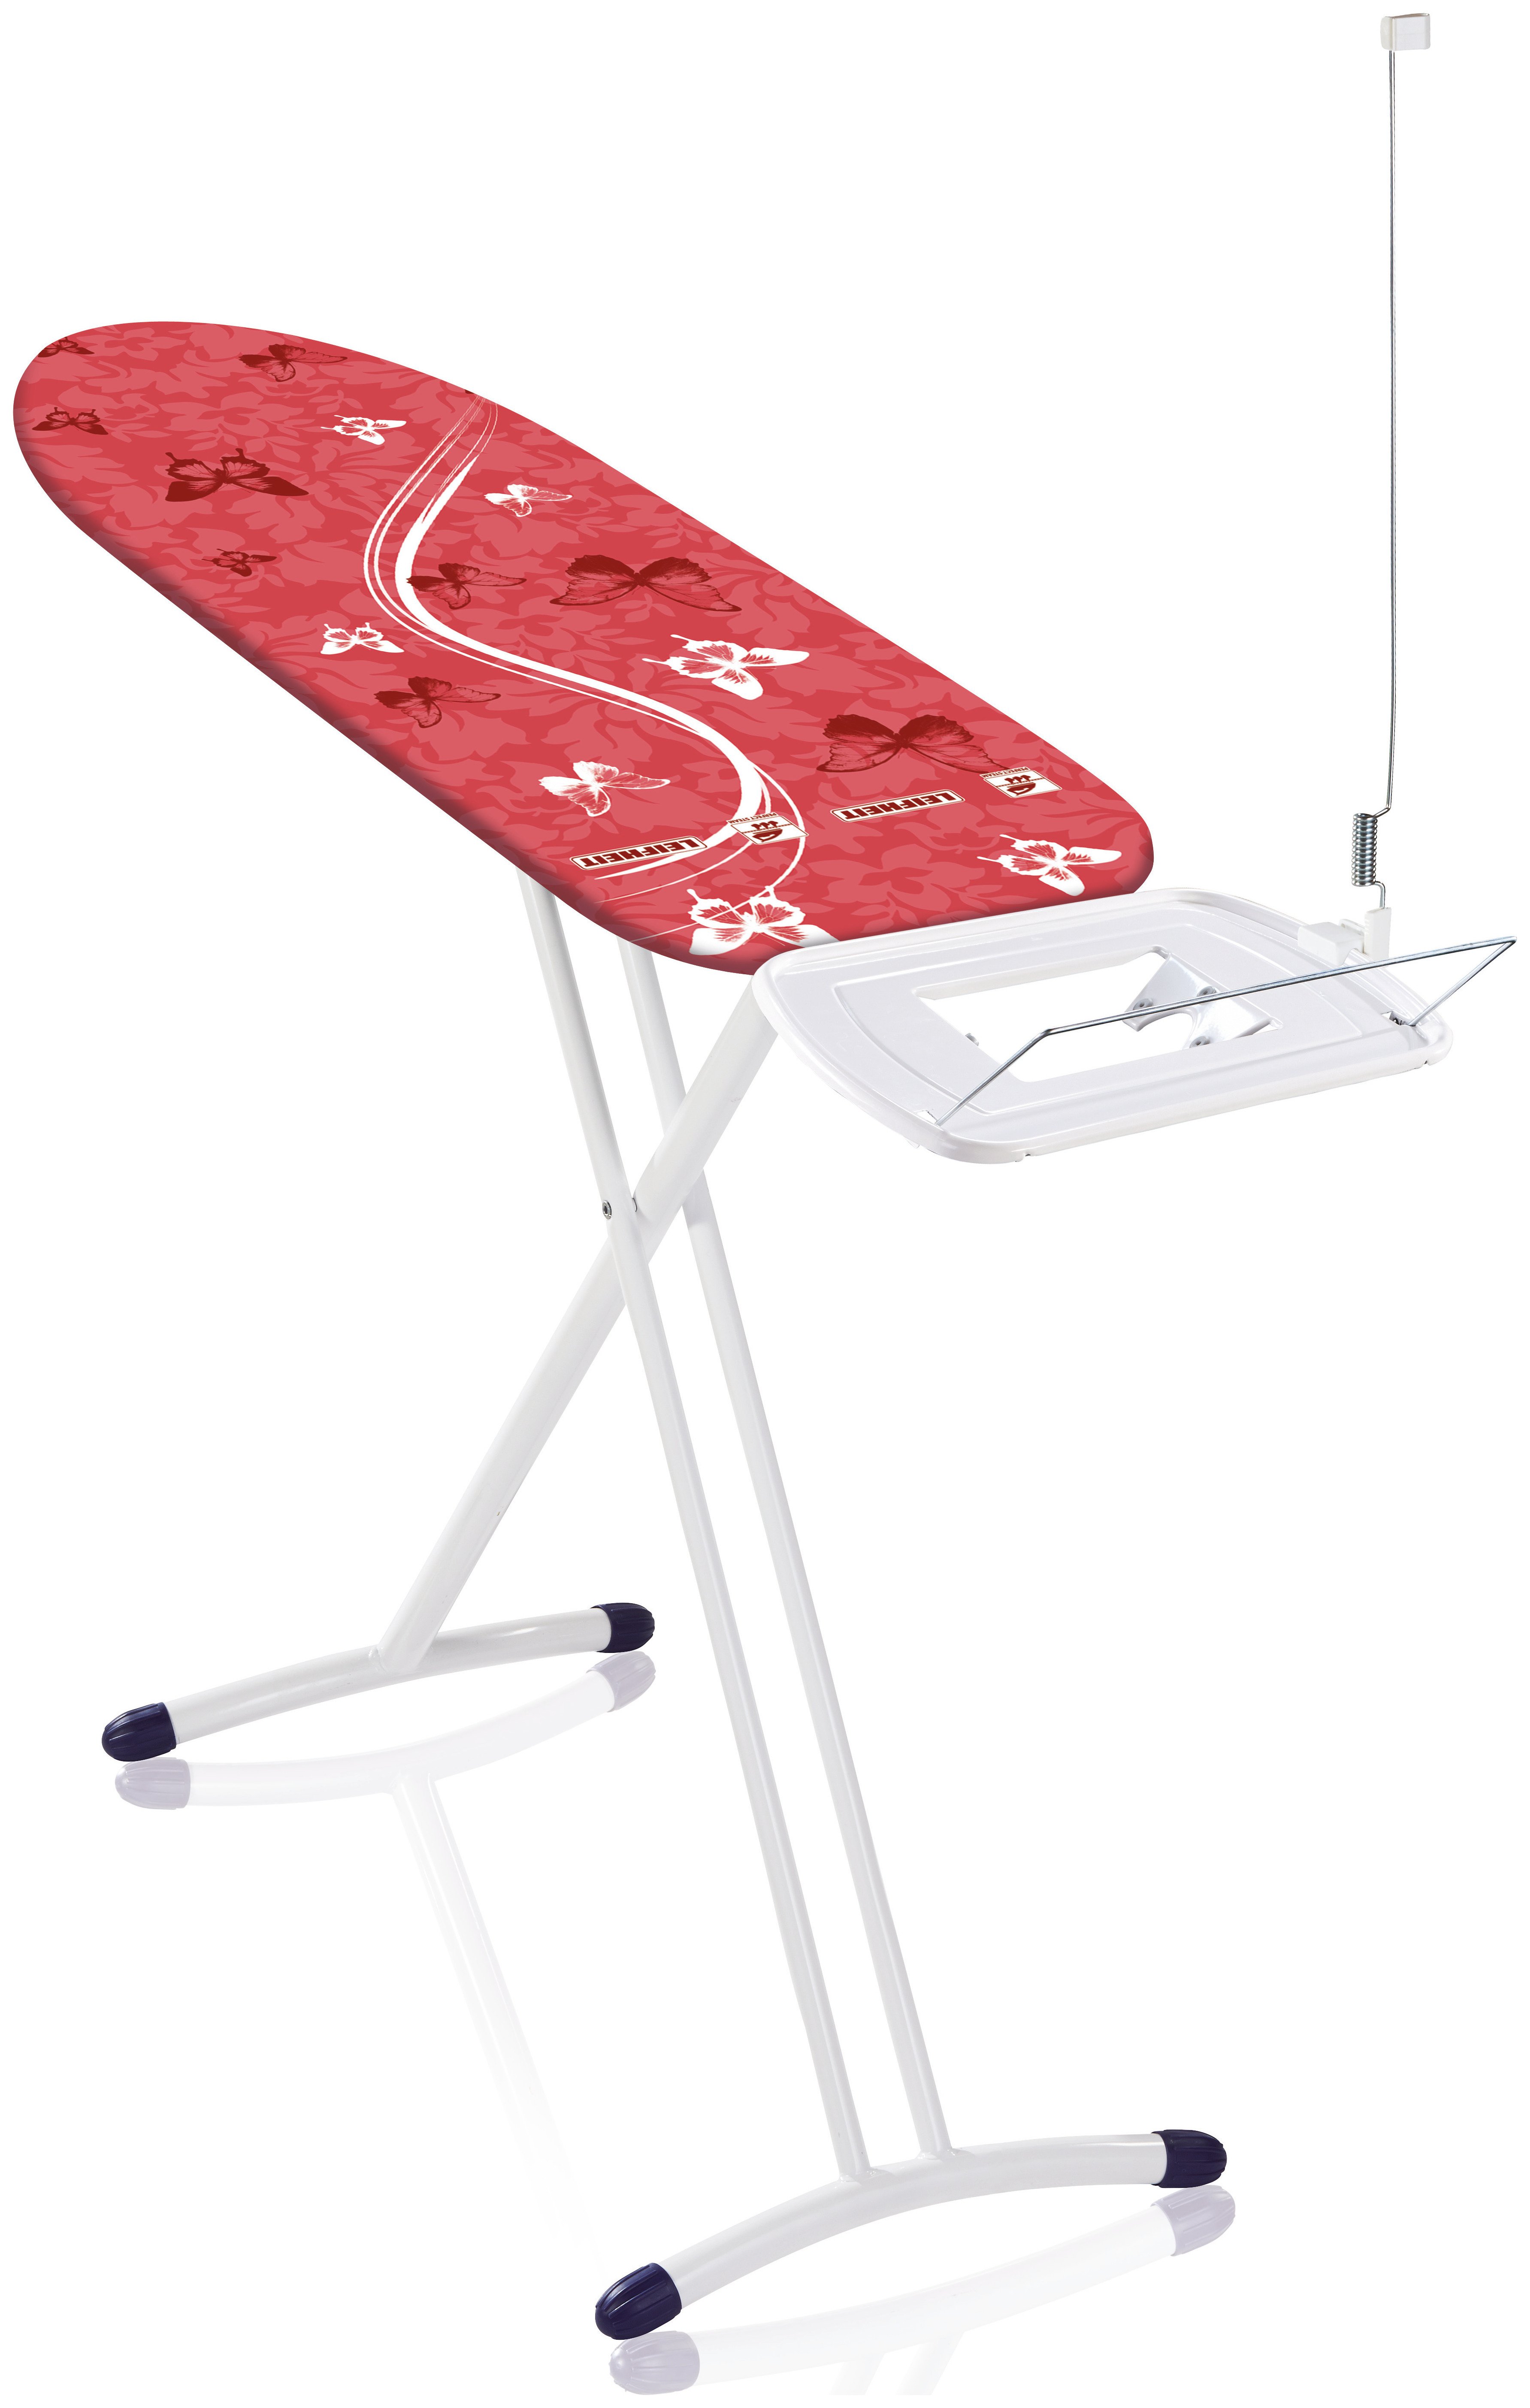 Leifheit Express Solid Air Ironing Board - 120x38cm.